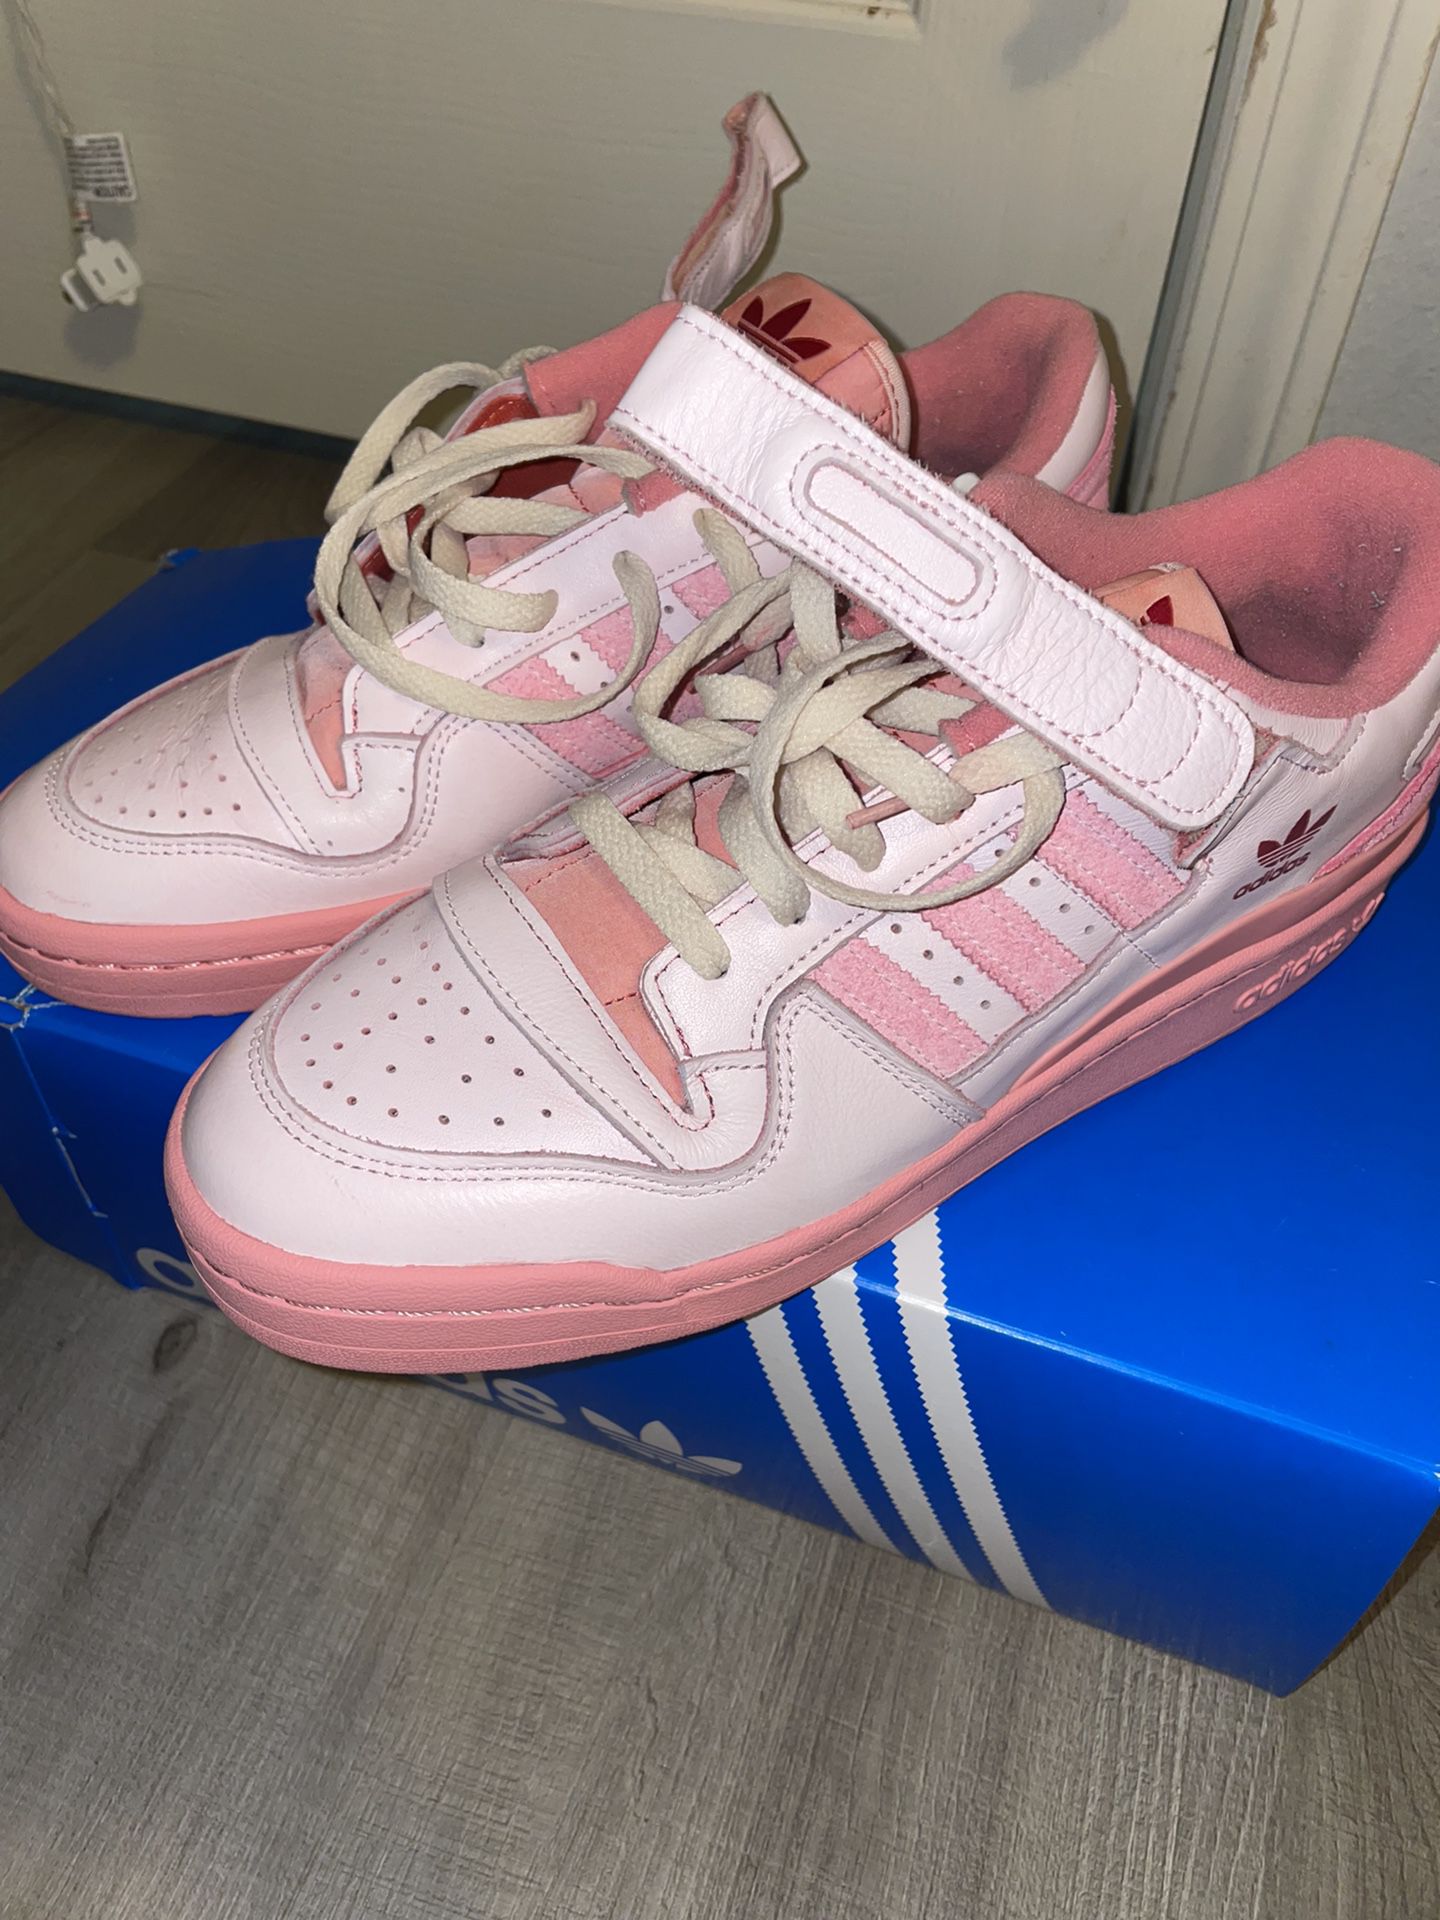 Adidas Forum 84 “Pink At Home”